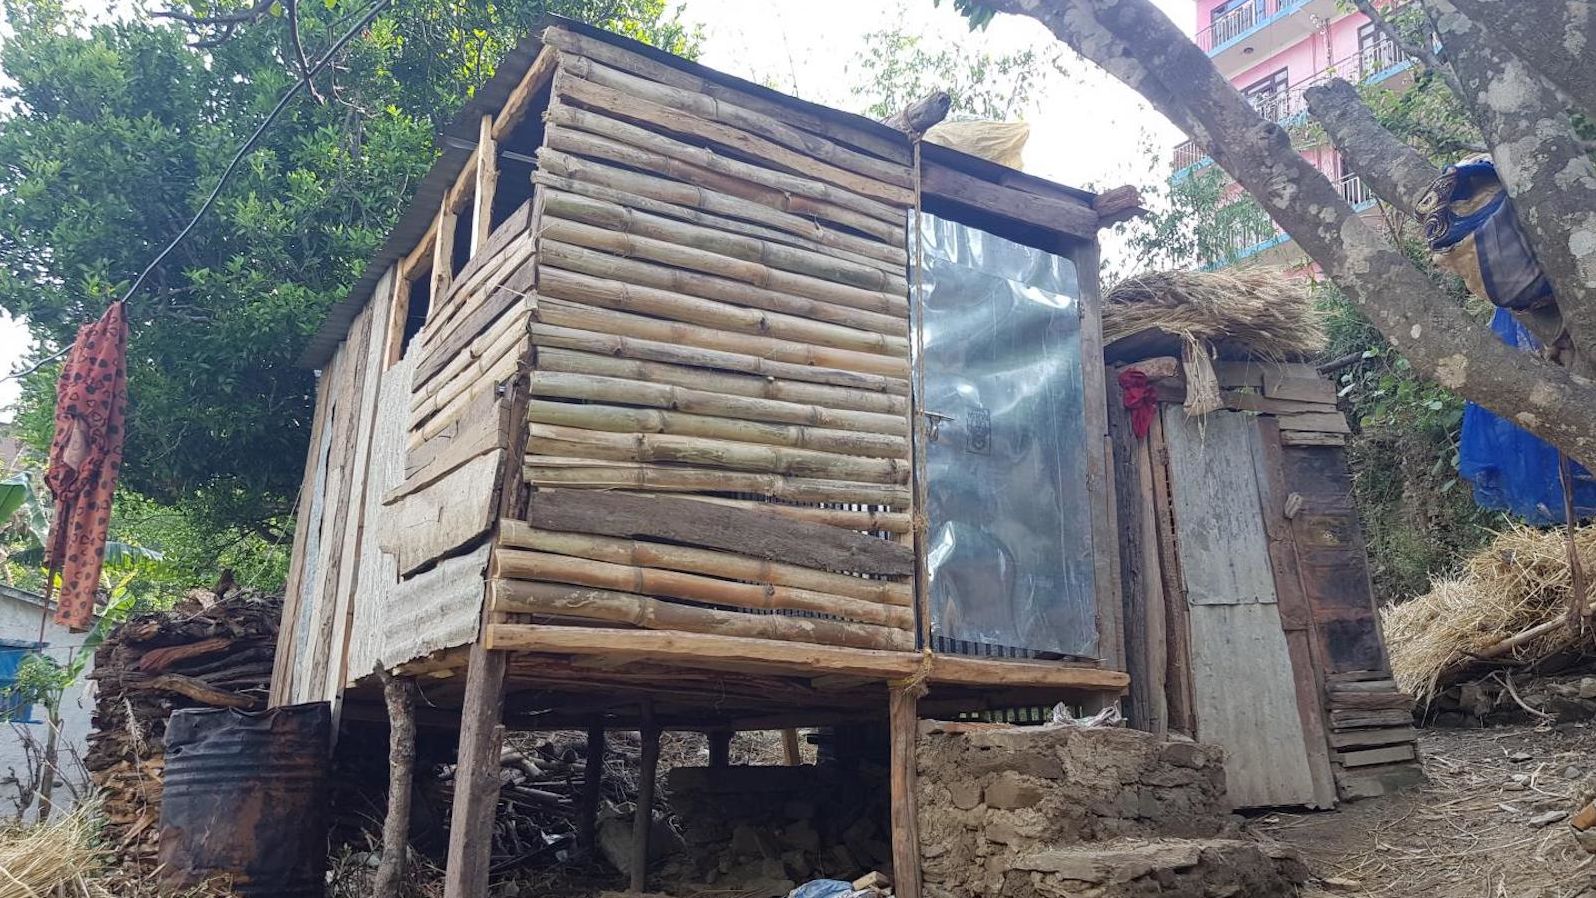 A menstruation hut in Nepal, photographed by researchers from the University of Bath.